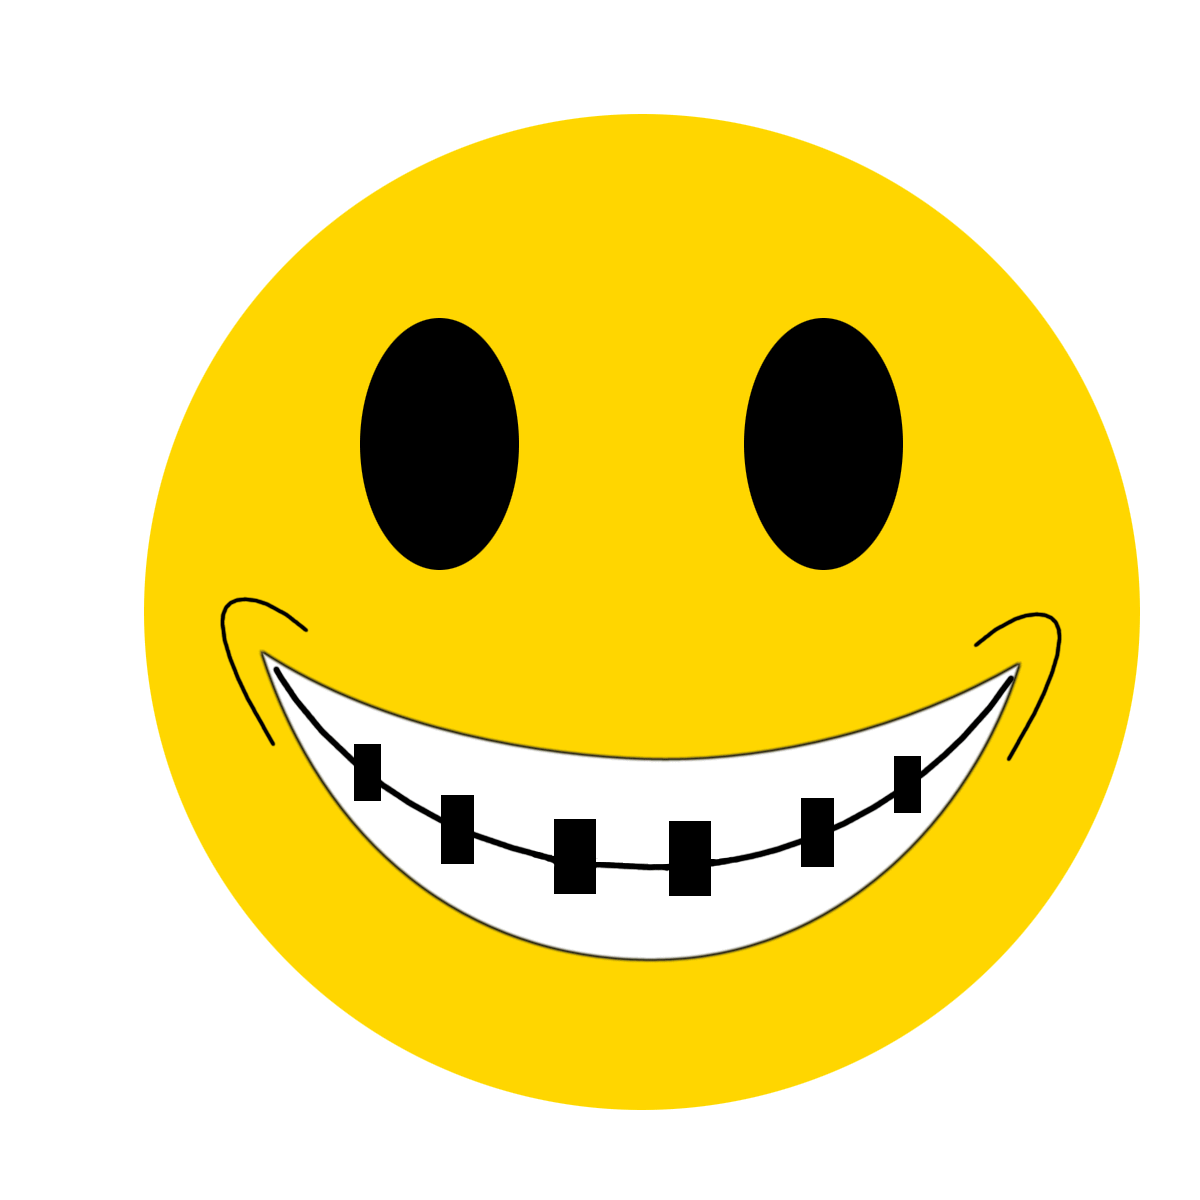 Funny Smiley Faces Cartoon wallpapers - High quality mobile ...